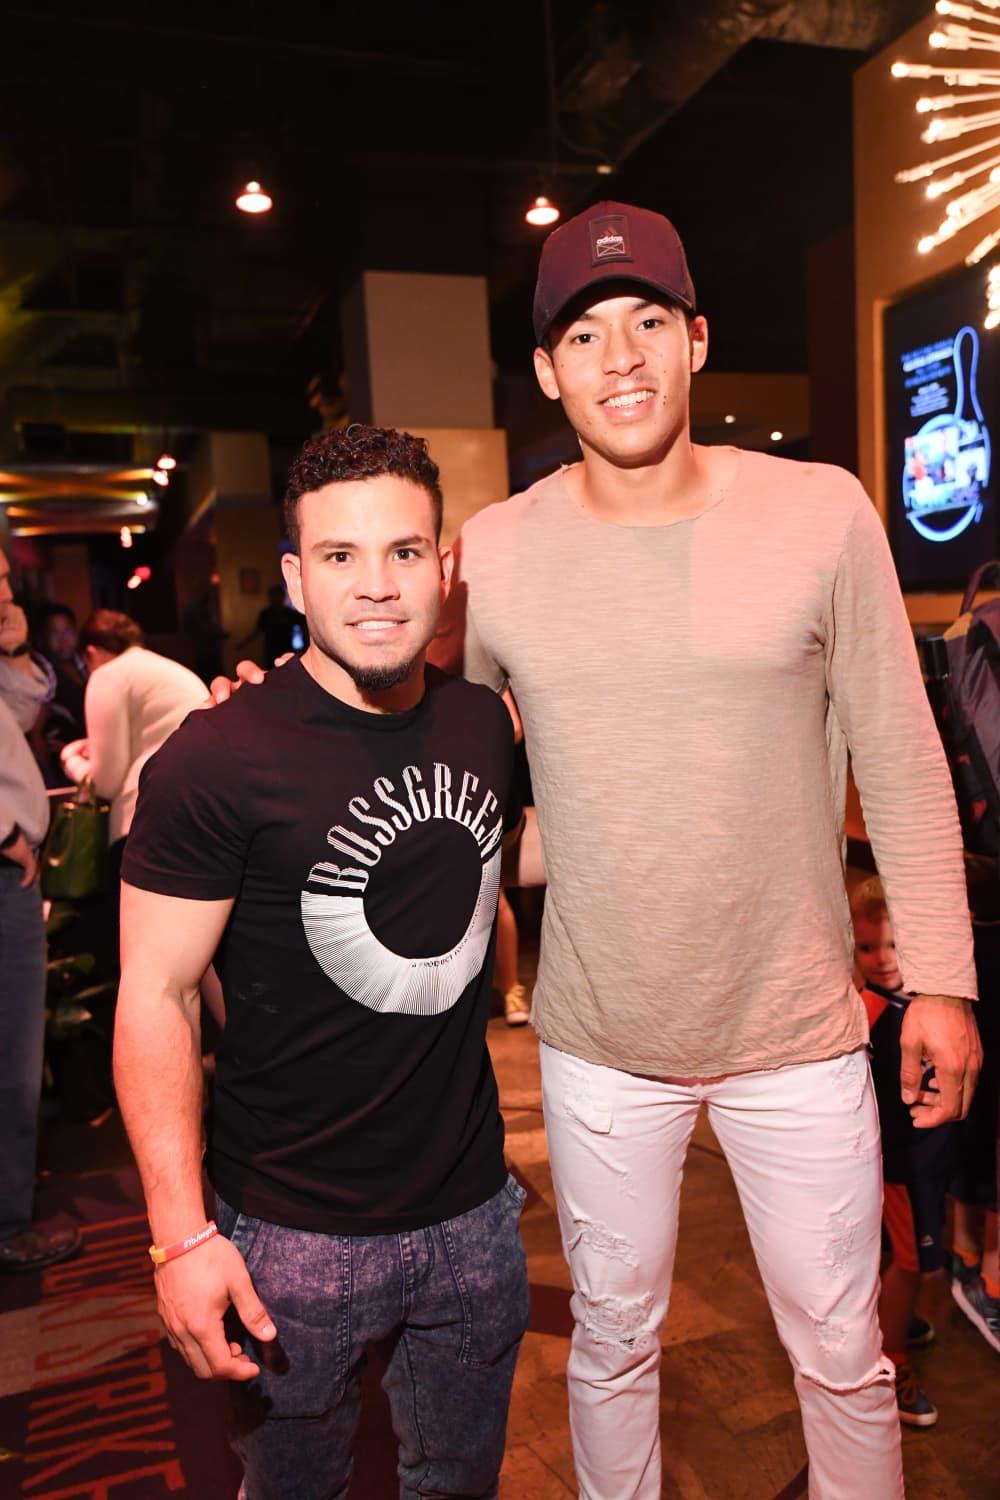 Astros star George Springer, teammates and fans bowl a strike for charity -  CultureMap Houston